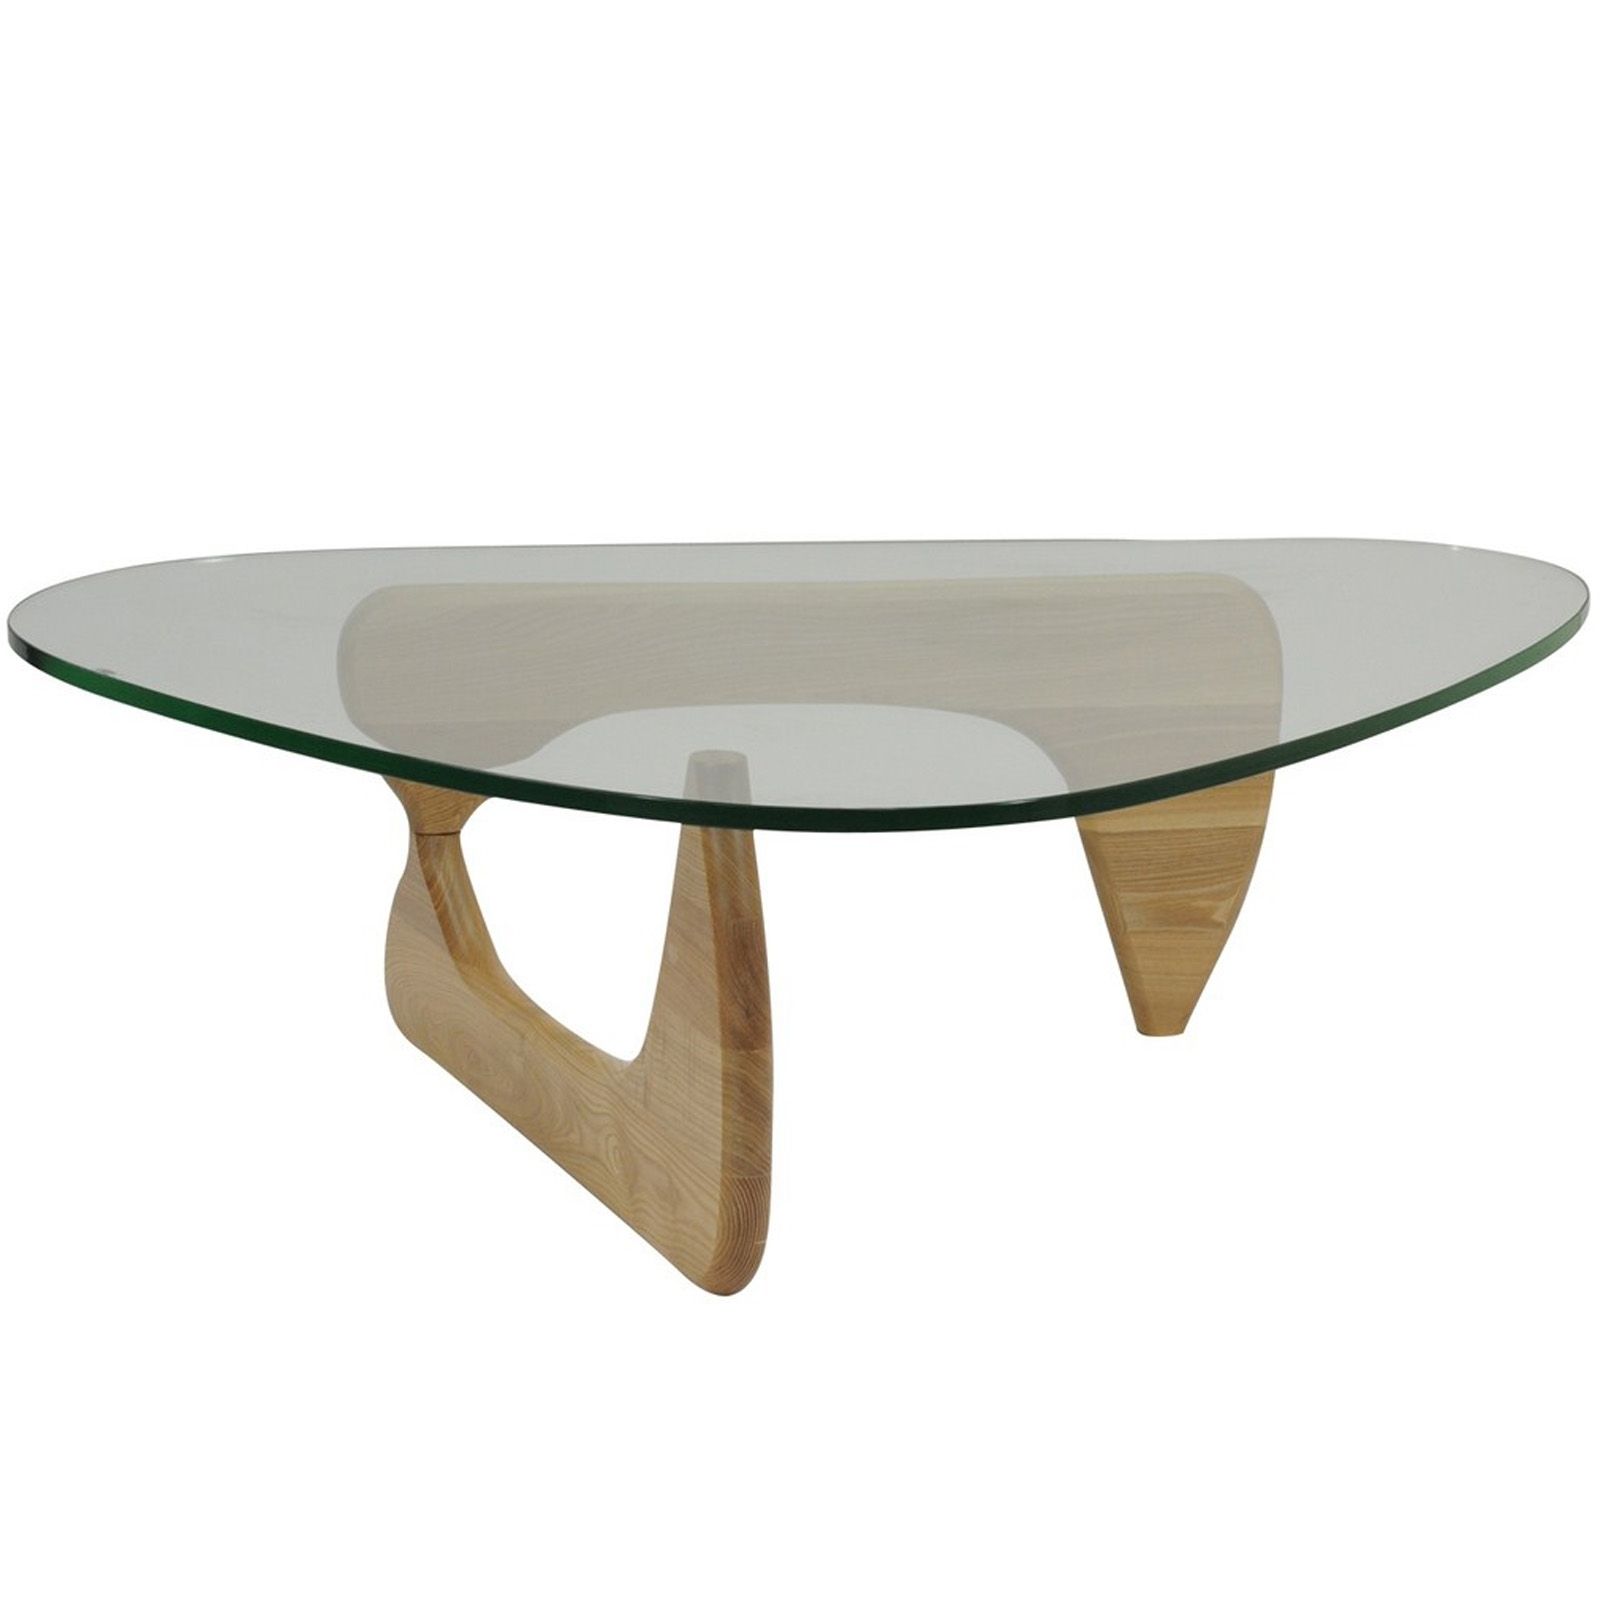 Triangle Glass Top Coffee Table, Plans For Diy Cabinets Uk Pertaining To White Triangular Coffee Tables (View 2 of 15)